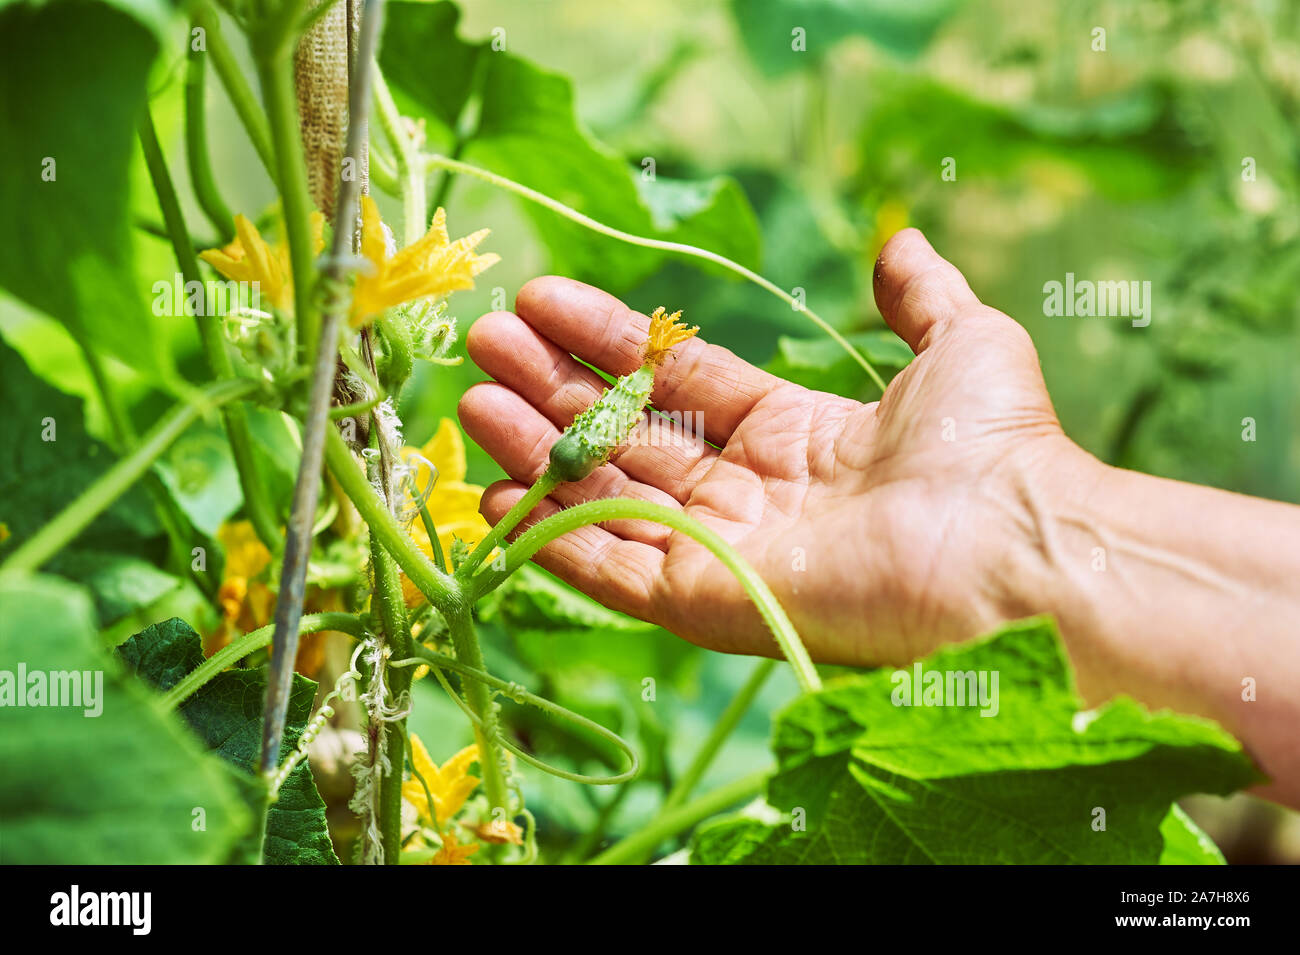 Woman holding a freshly harvested cucumbers. Locavore movement, local farming, harvesting concept Stock Photo